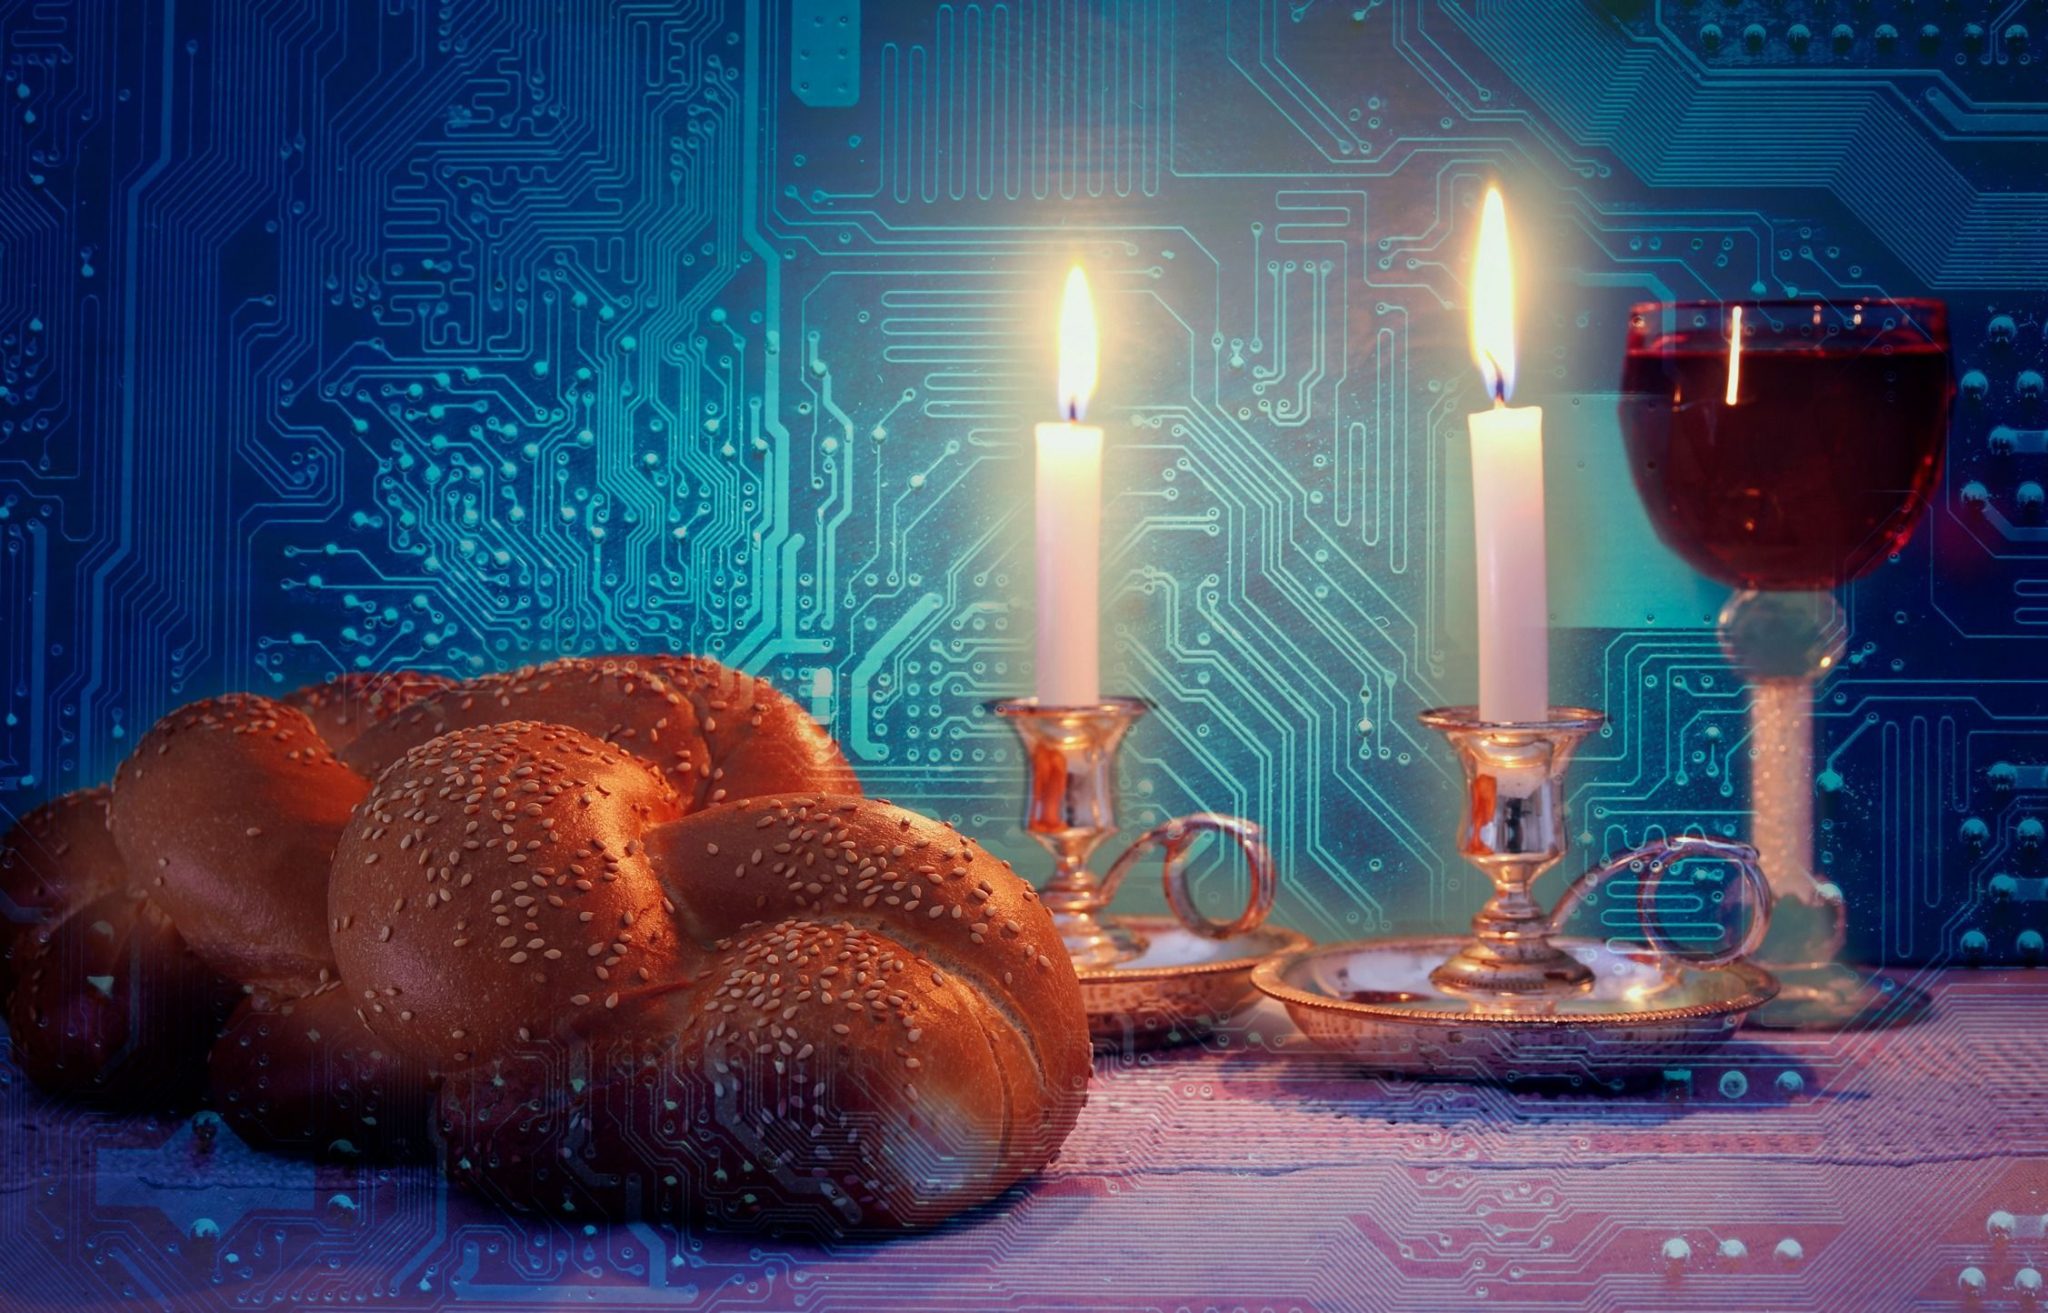 A Shabbat Dinner and Teaching with The Rev. Aaron Eime